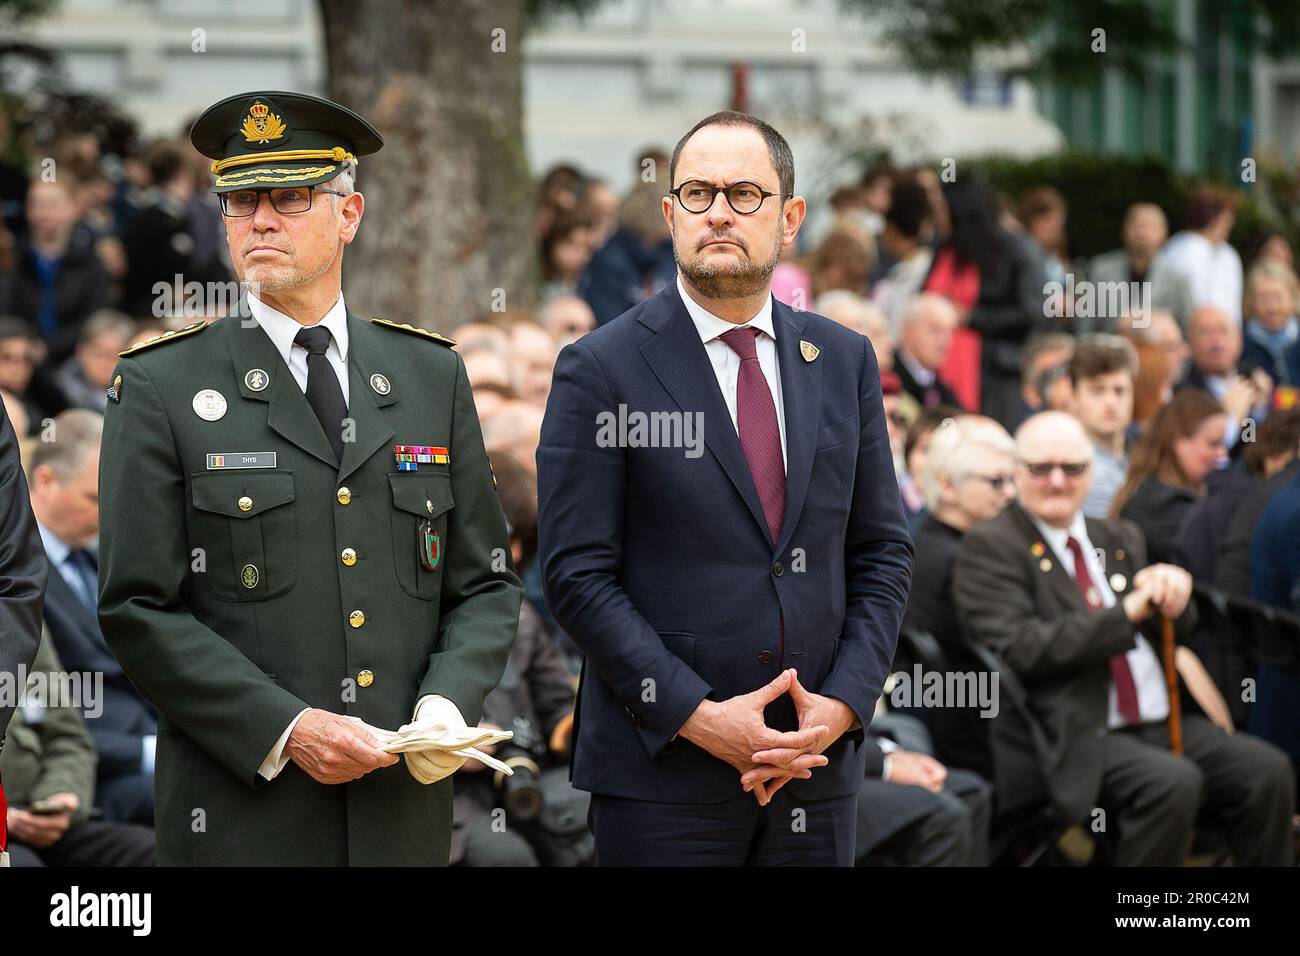 Brussels, Belgium. 08th May, 2023. Federal Minister Vincent Van Quickenborne pictured during the commemoration ceremony of the 78th anniversary of the end of the Second World War in Europe, at the Tomb of the Unknown Soldier, in Brussels, Monday 08 May 2023. Exactly 78 years ago, on May 8, 1945 at 3:00 pm, the European population learned that the Second World War was coming to an end. The German army signed their capitulation the night before and the Allies were victorious. With the end of this war, a new era started for Belgium, Europe and the world. BELGA PHOTO JAMES ARTHUR GEKIERE Credit: B Stock Photo